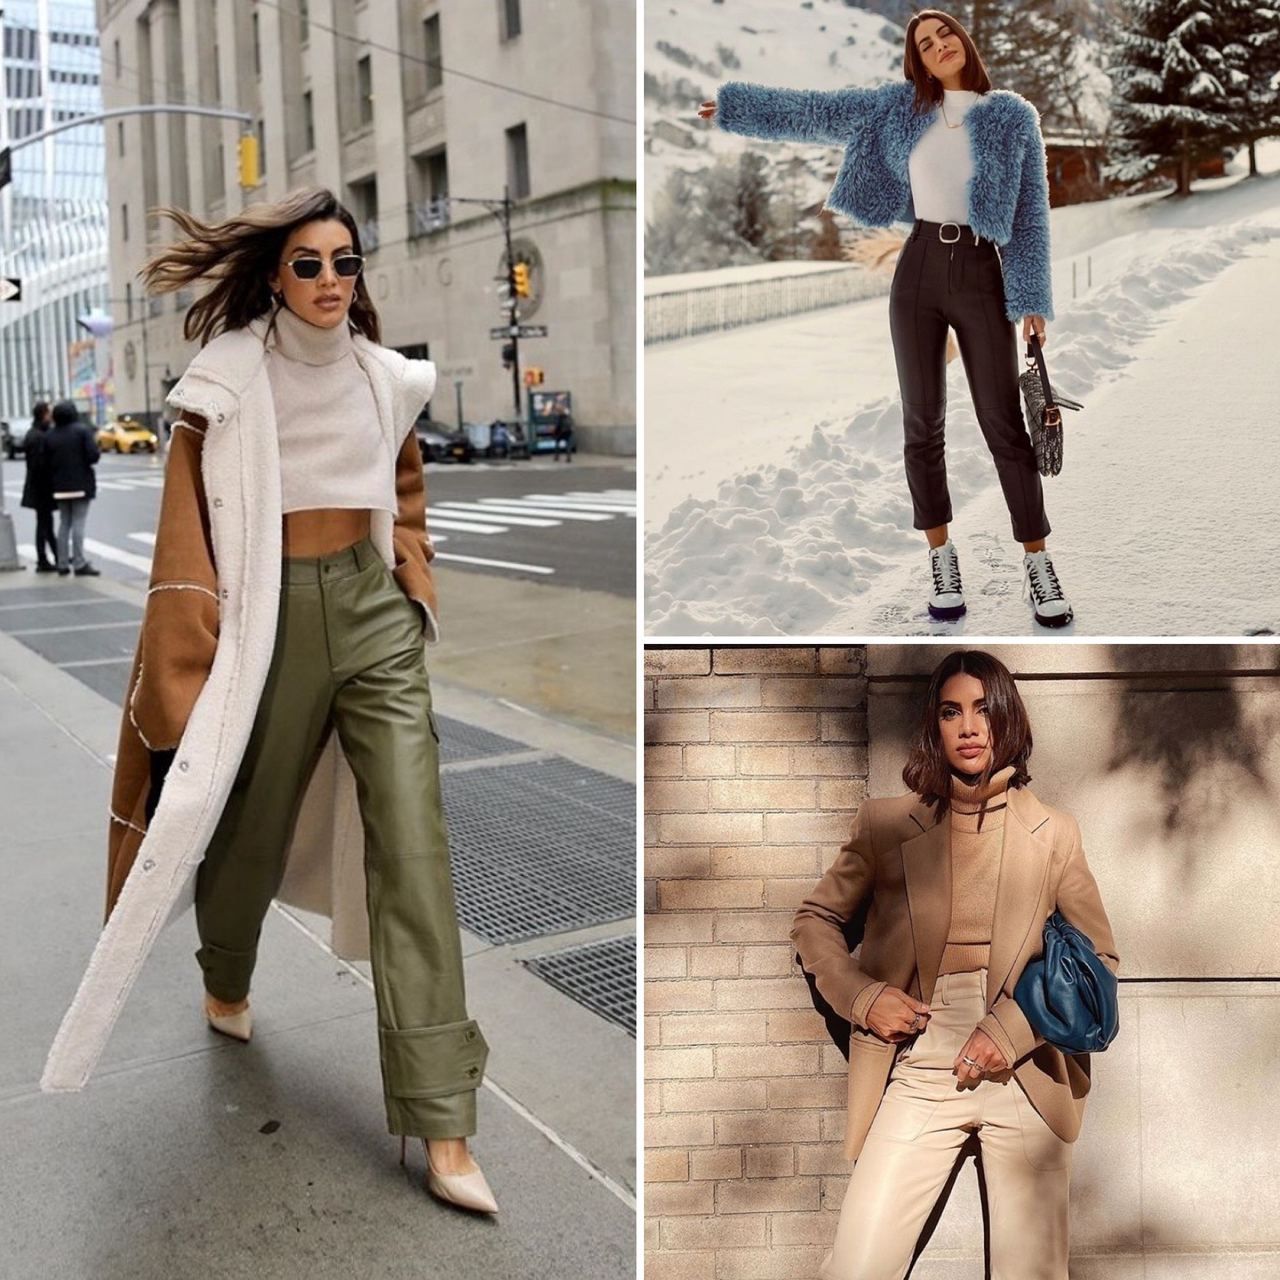 How to wear leather pants this winter? Learn from celebrities